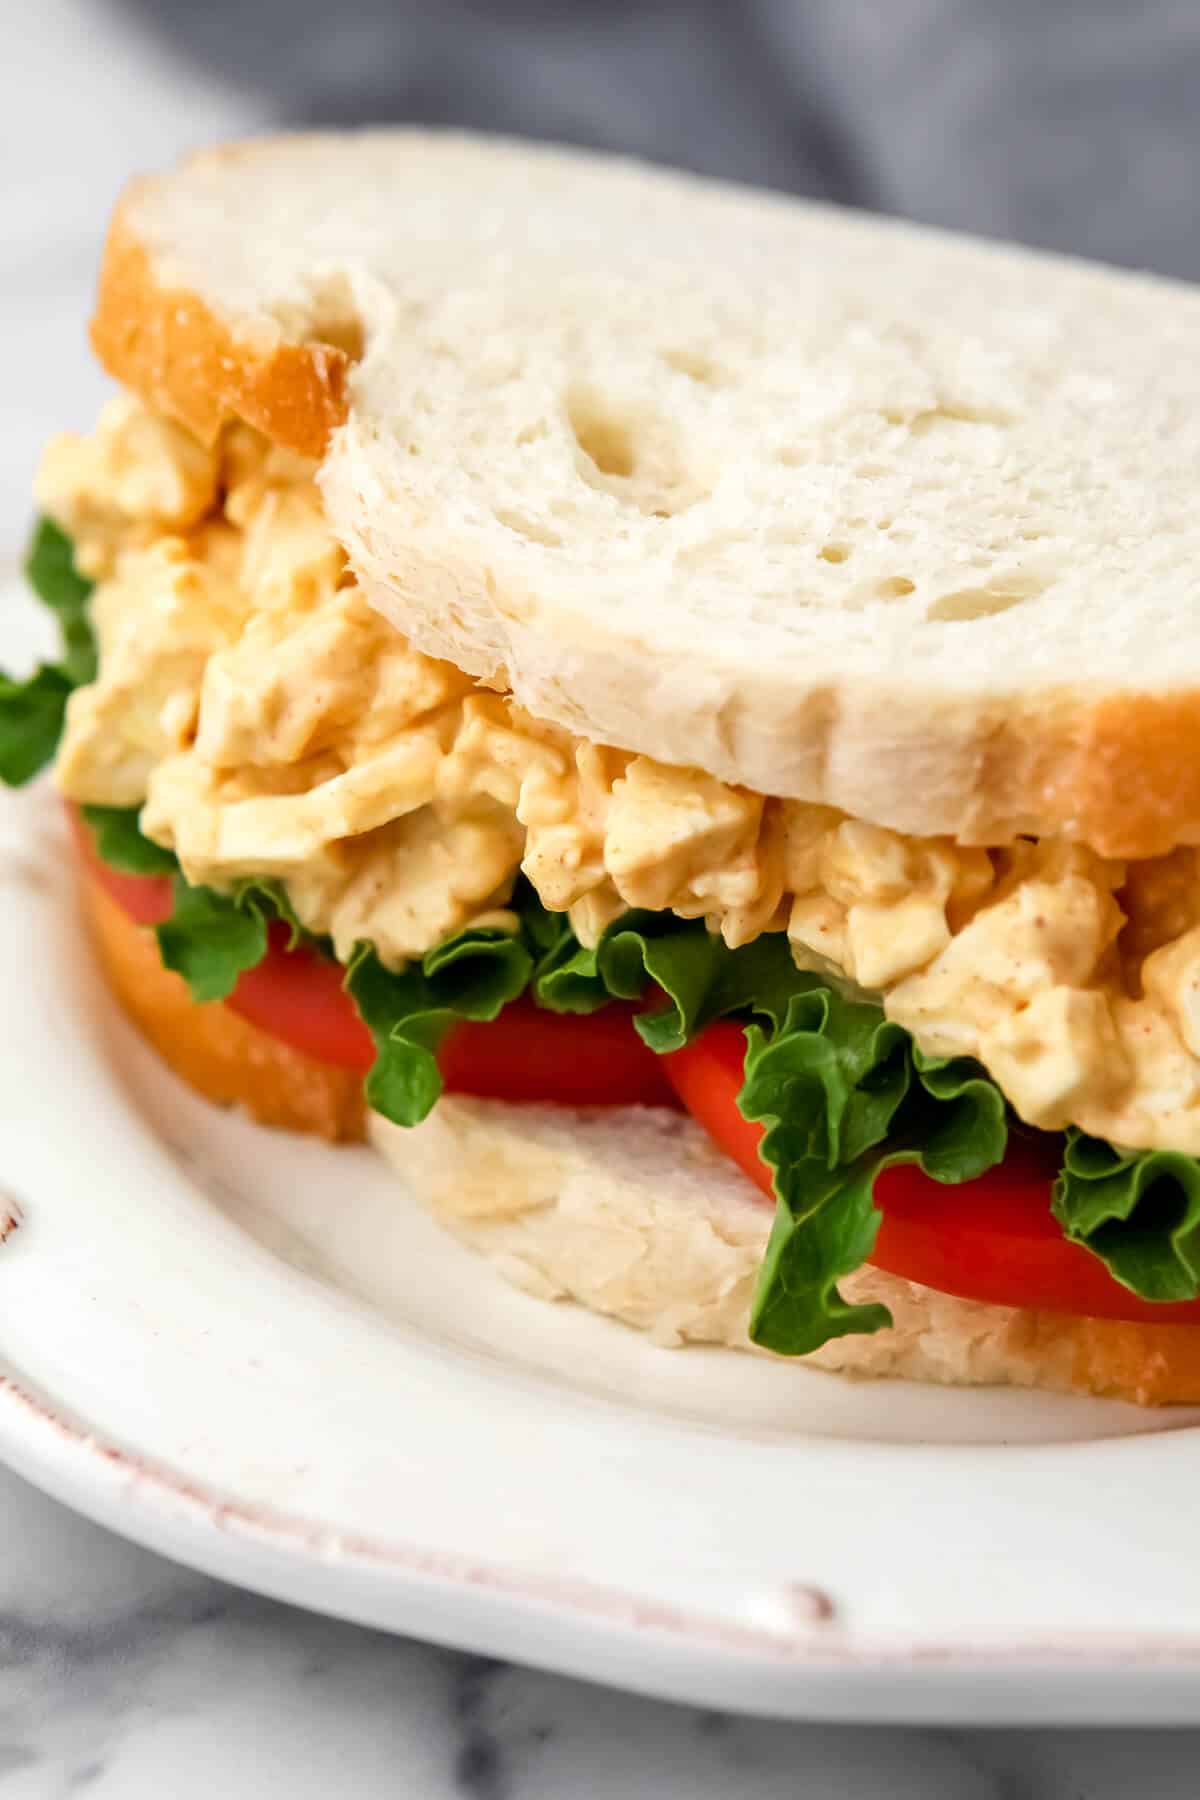 A tofu egg salad sandwich on a white plate with tomatoes and lettuce.